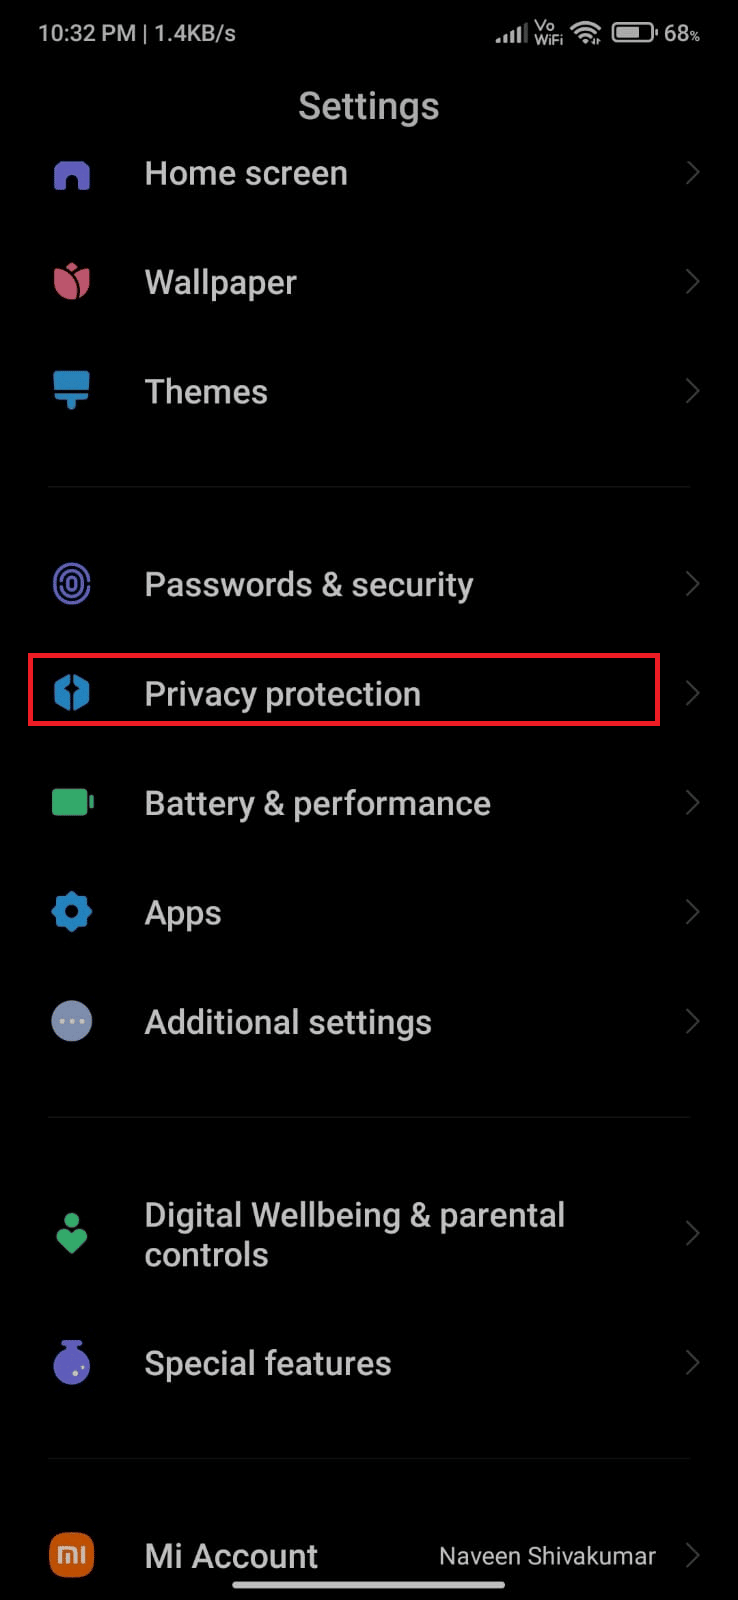 Look for an option for Privacy protection and tap on it.